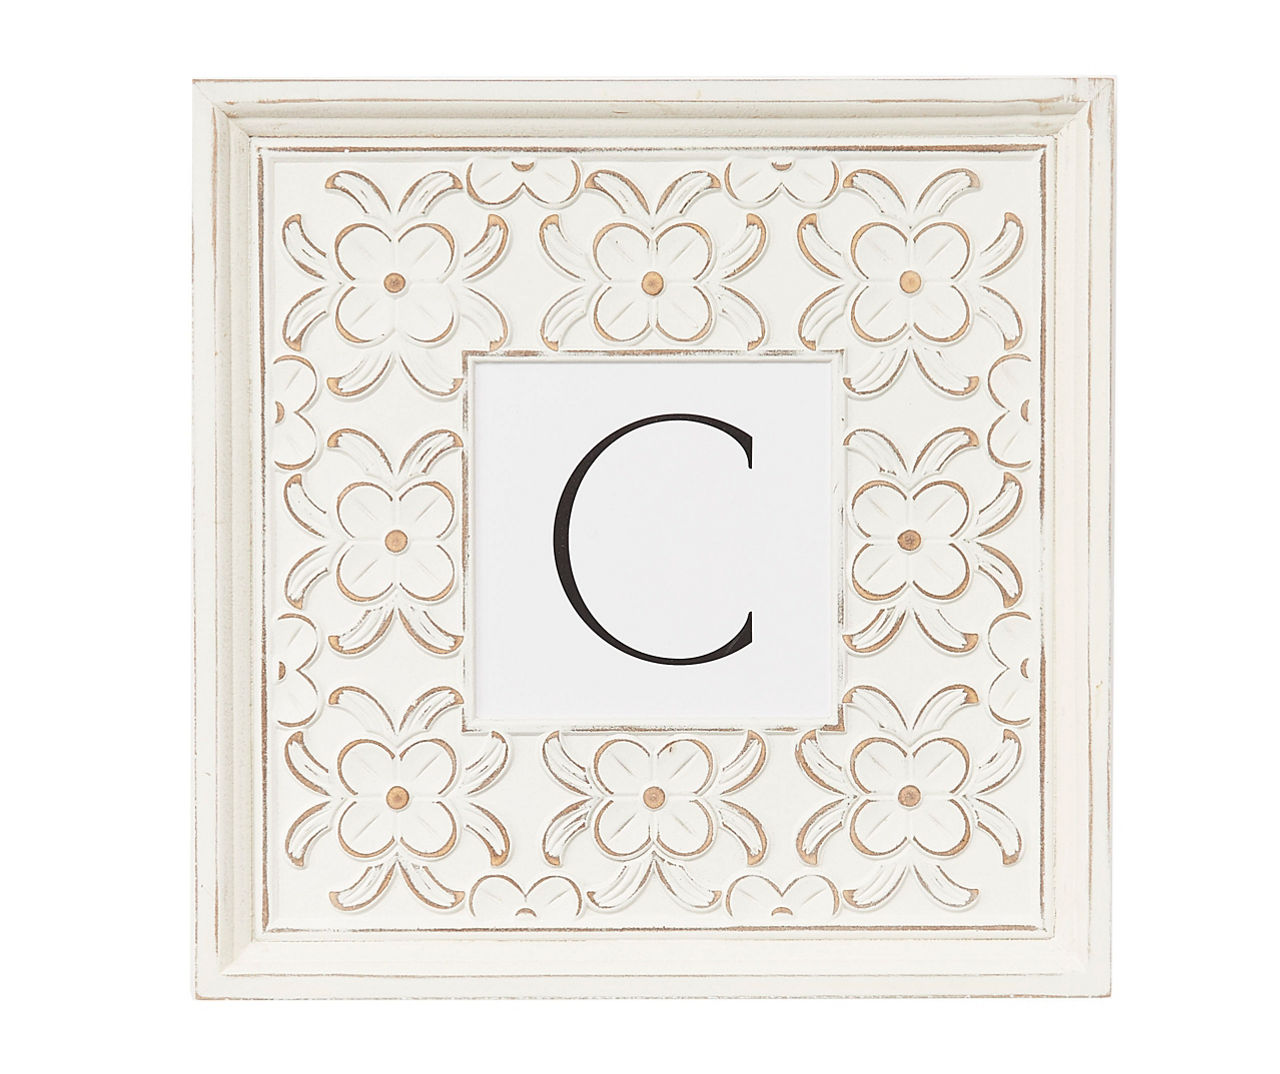 "C" White Distressed Carved Floral Monogram Square Wall Plaque